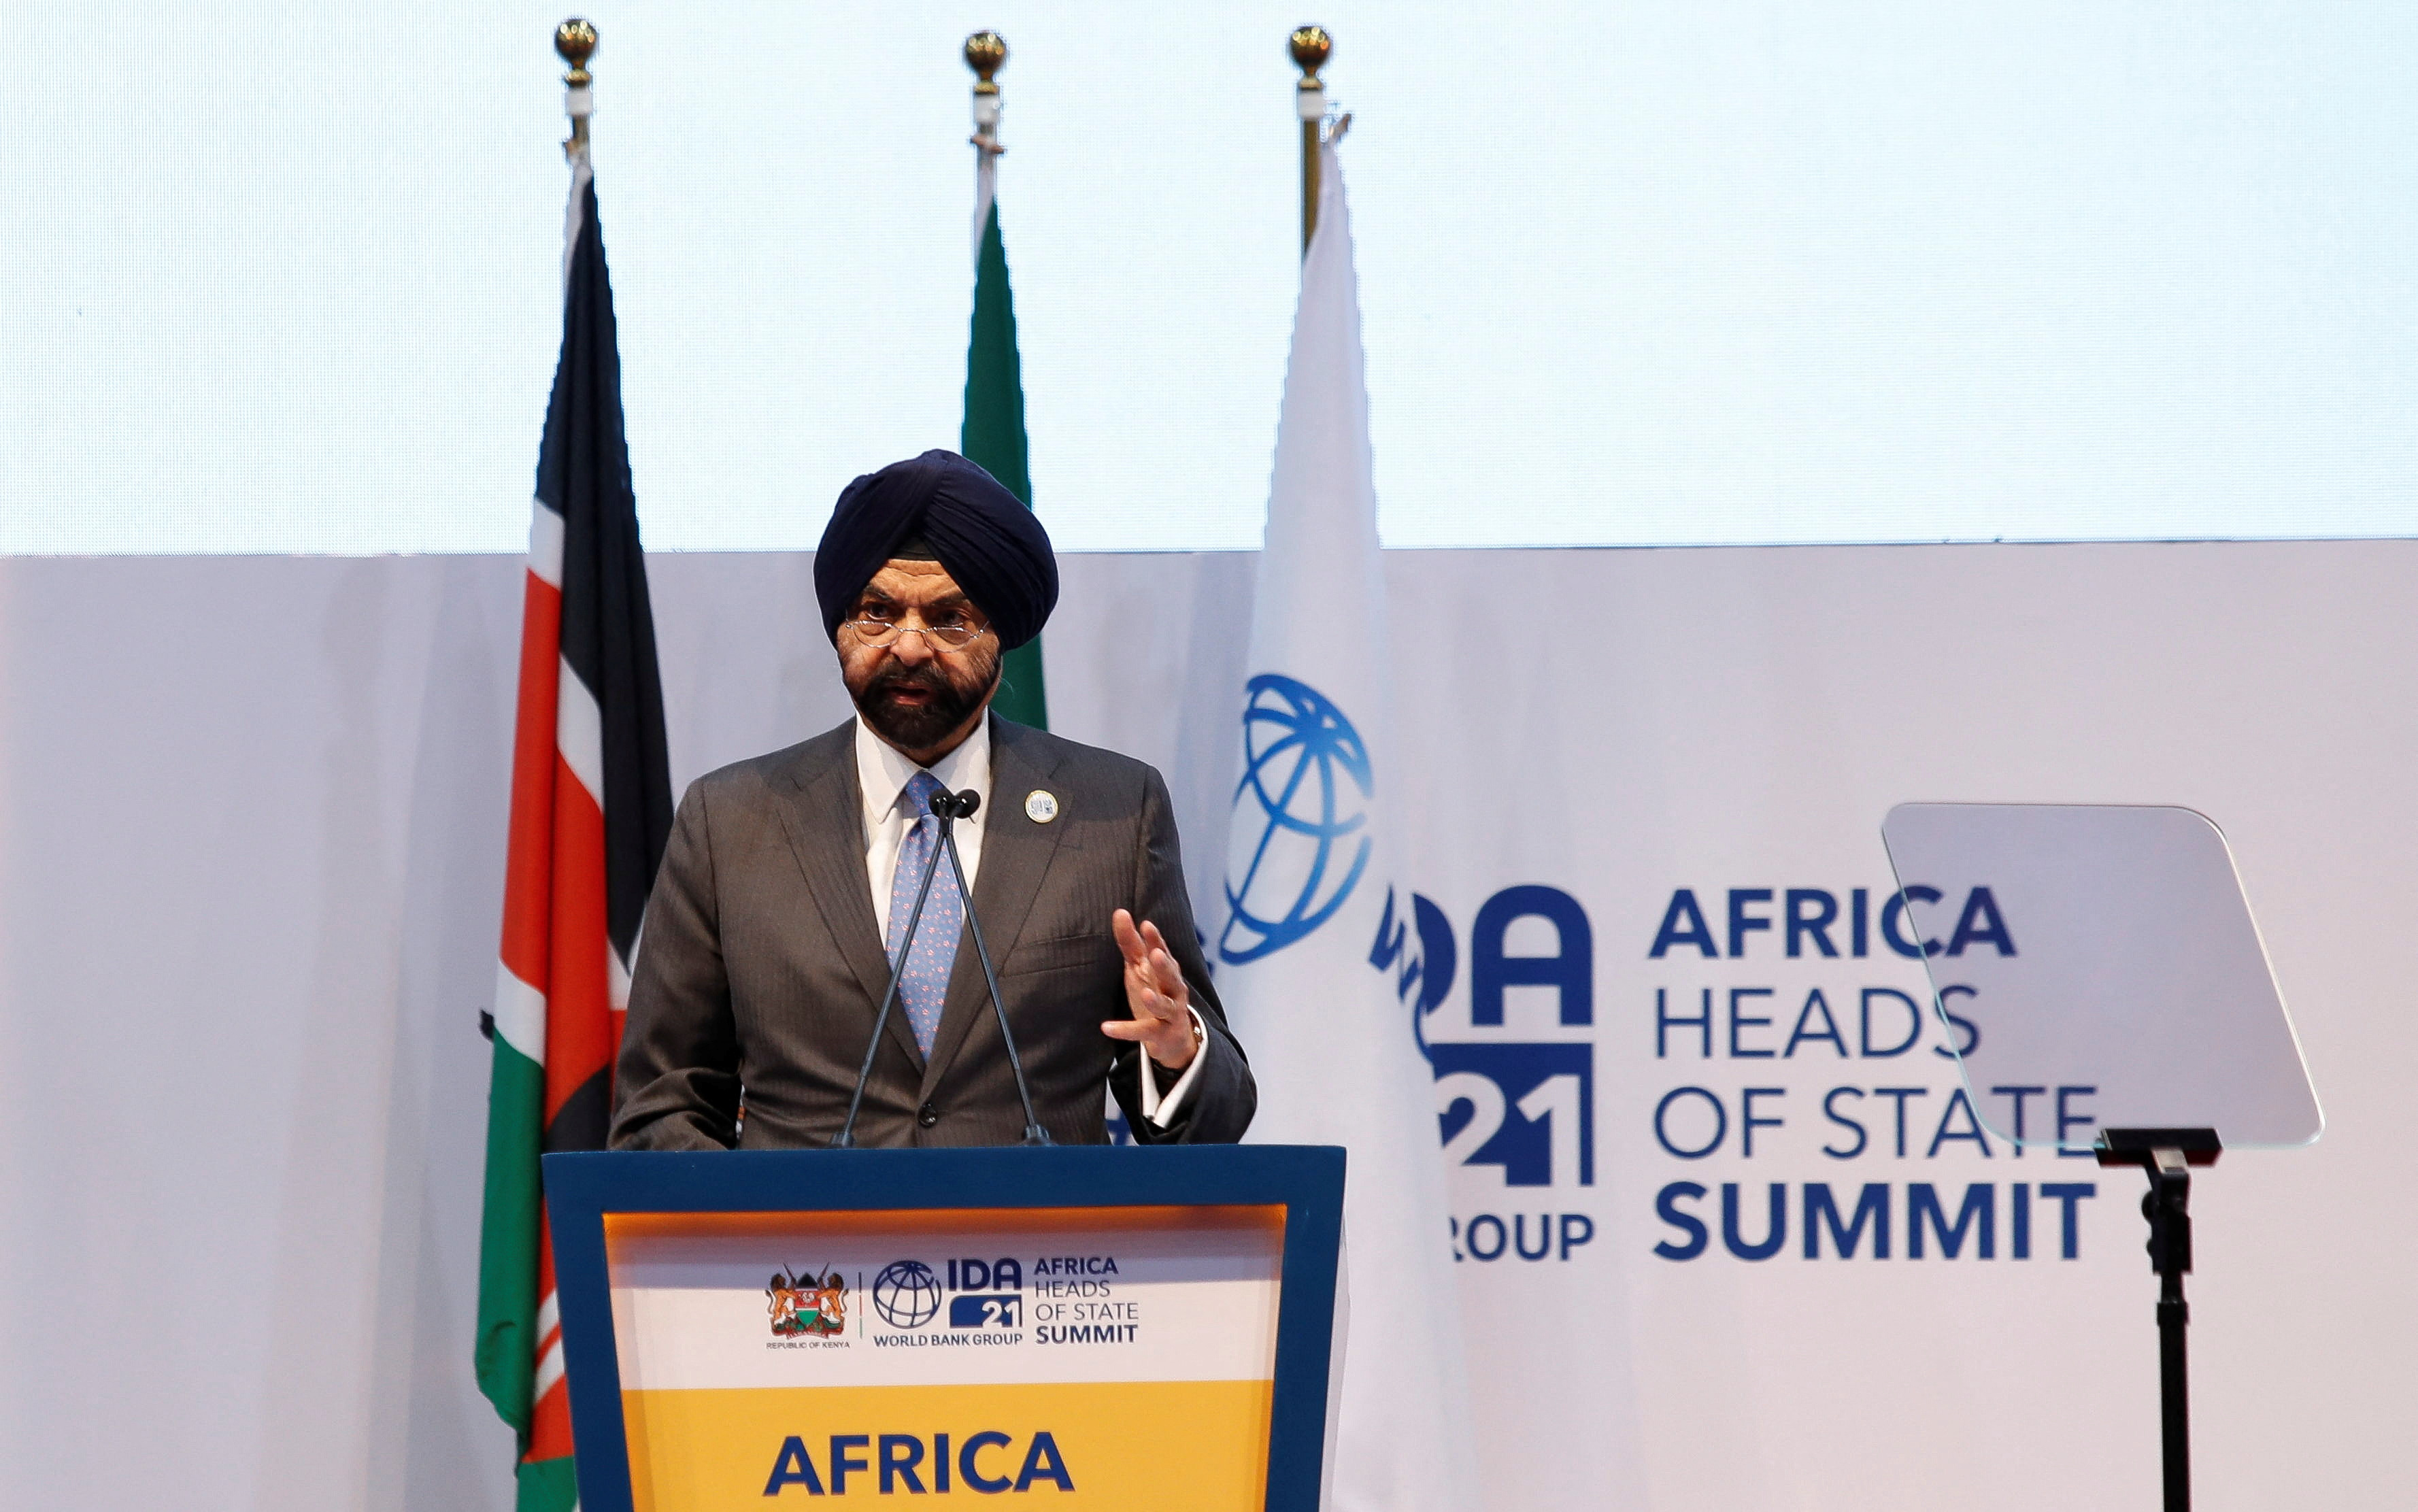 World Bank Group President Ajay Banga addresses delegates during the IDA for Africa Heads of State Summit in Nairobi